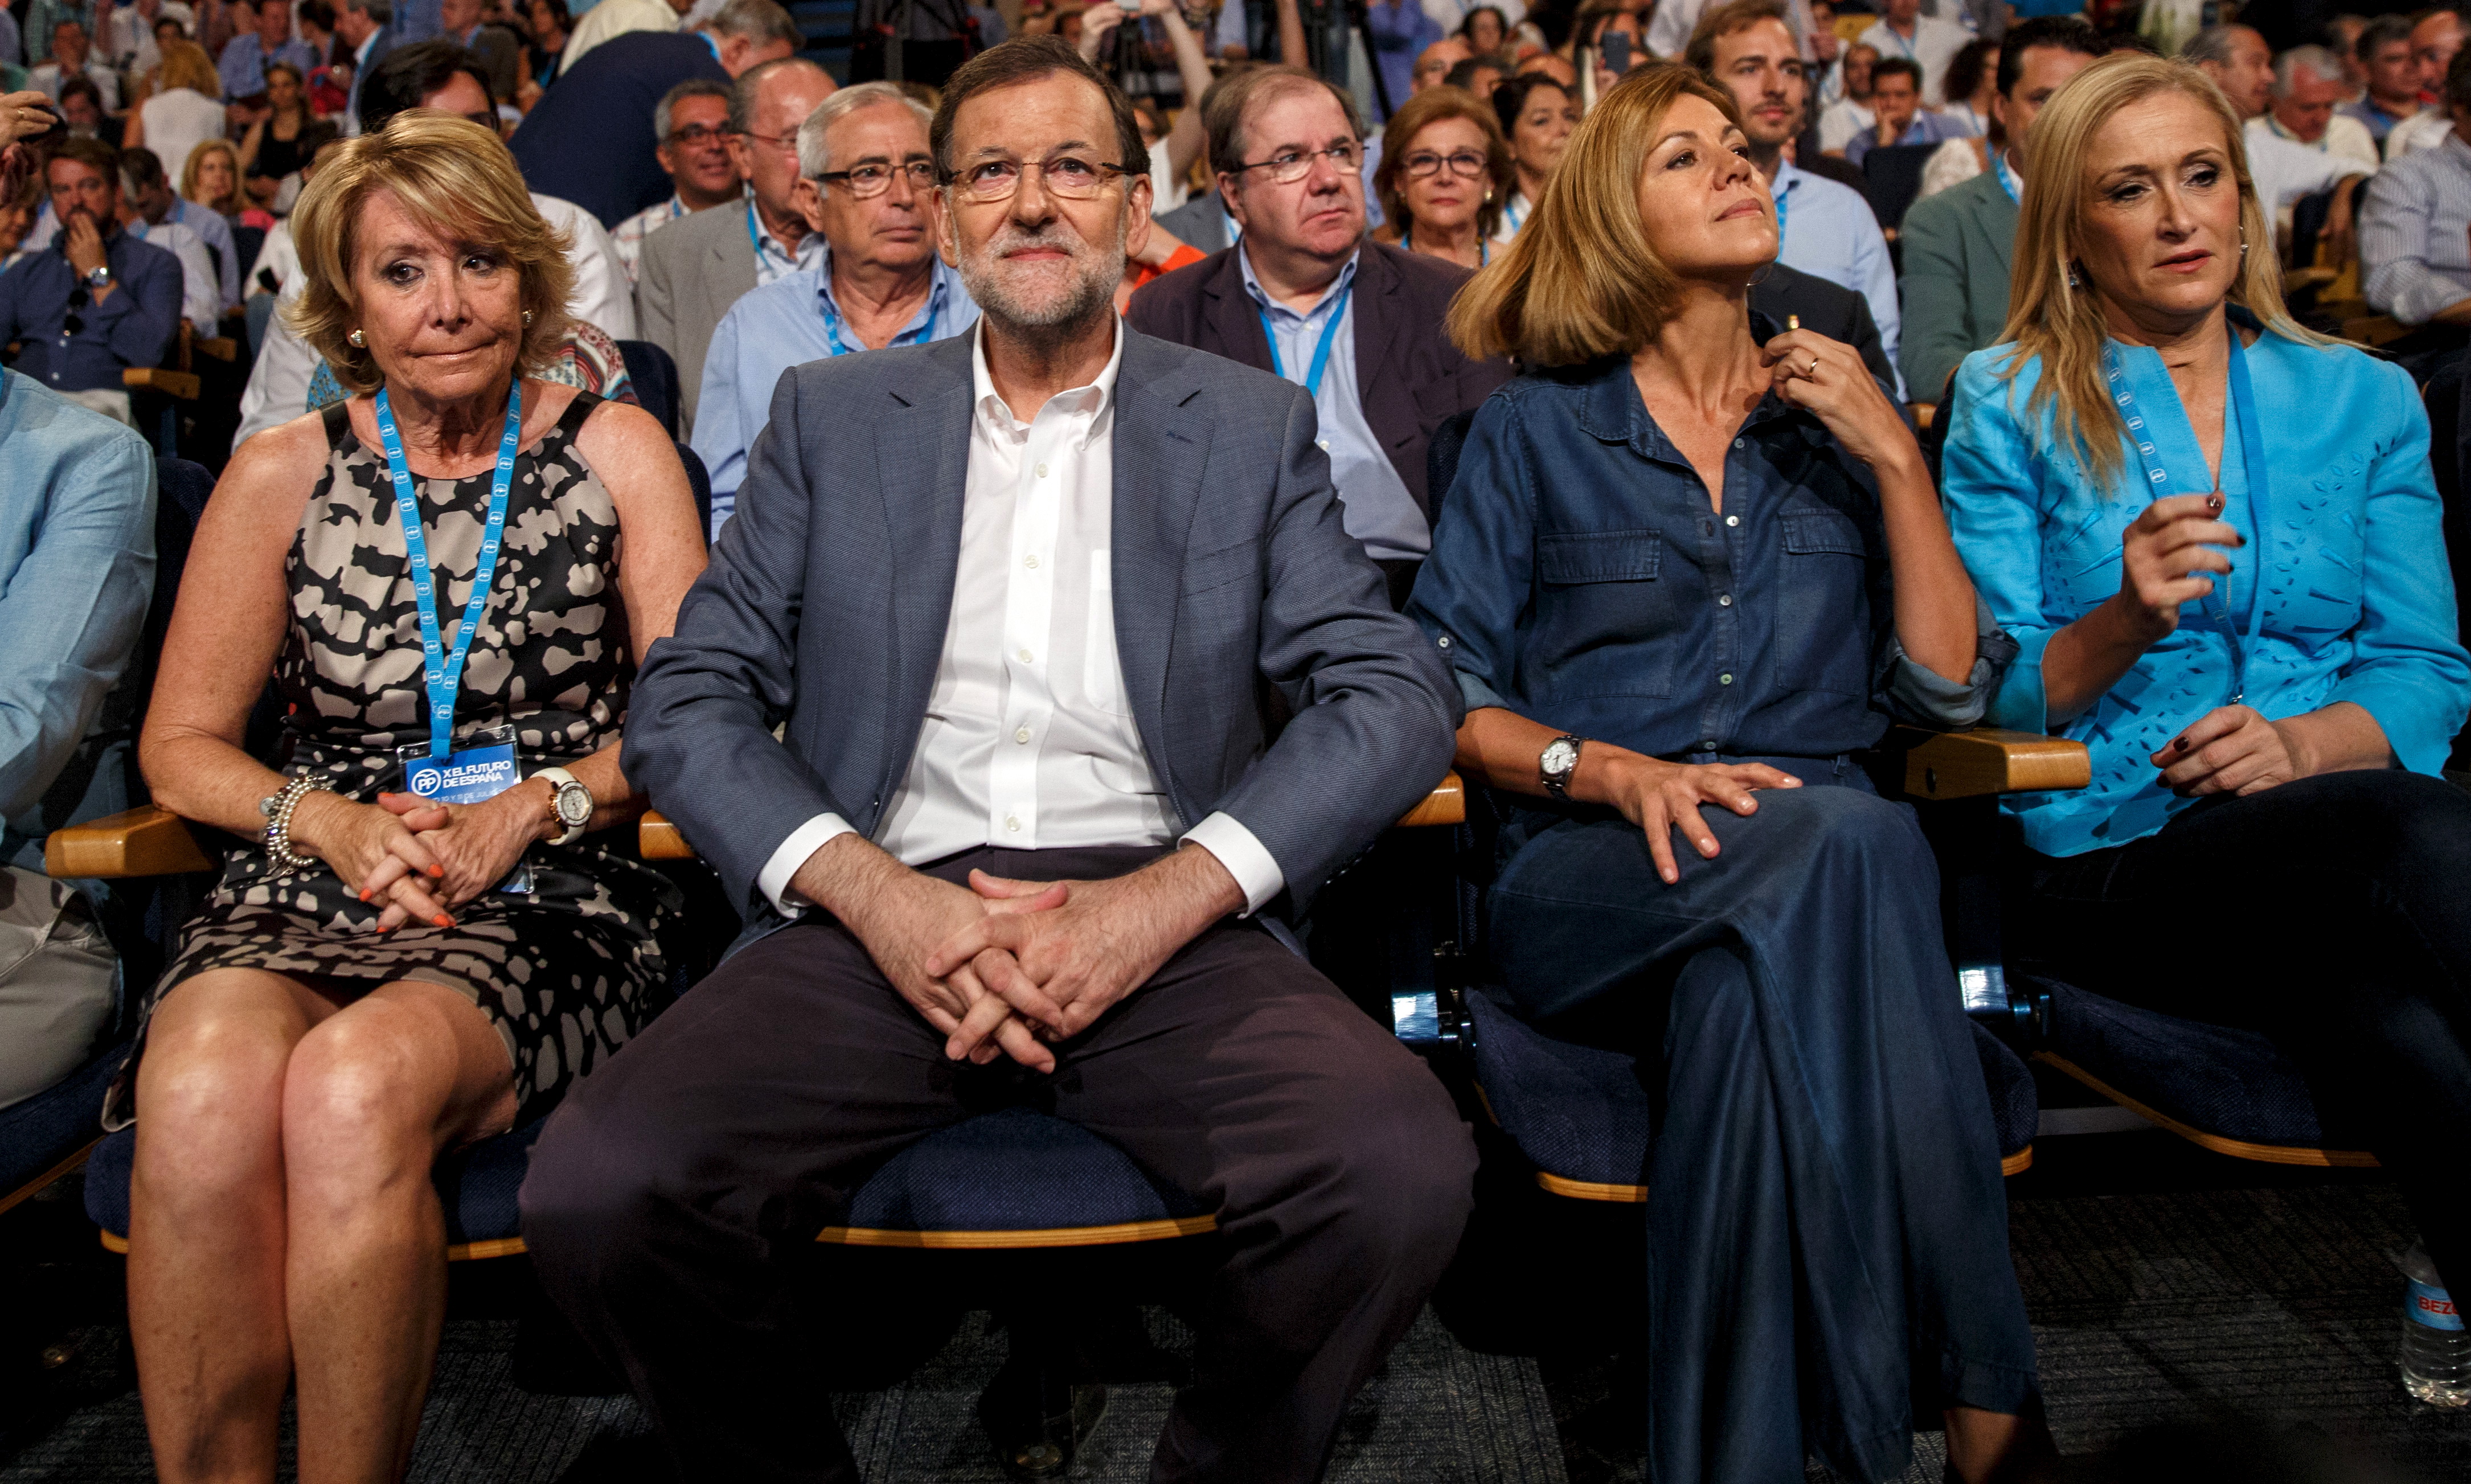 L-R: Madrid town hall councillor Esperanza Aguirre, Prime Minister Mariano Rajoy, People's Party (PP) party secretary, Maria Dolores de Cospedal and Madrid regional president Cristina Cifuentes attend a party rally in Madrid, Spain, July 11, 2015. Spain said on Friday it would cut central government spending further in 2016, offsetting broad-based tax cuts unveiled last week as it looks to keep a healthy economic recovery on track ahead of national elections. REUTERS/Andrea Comas - RTX1JZCM